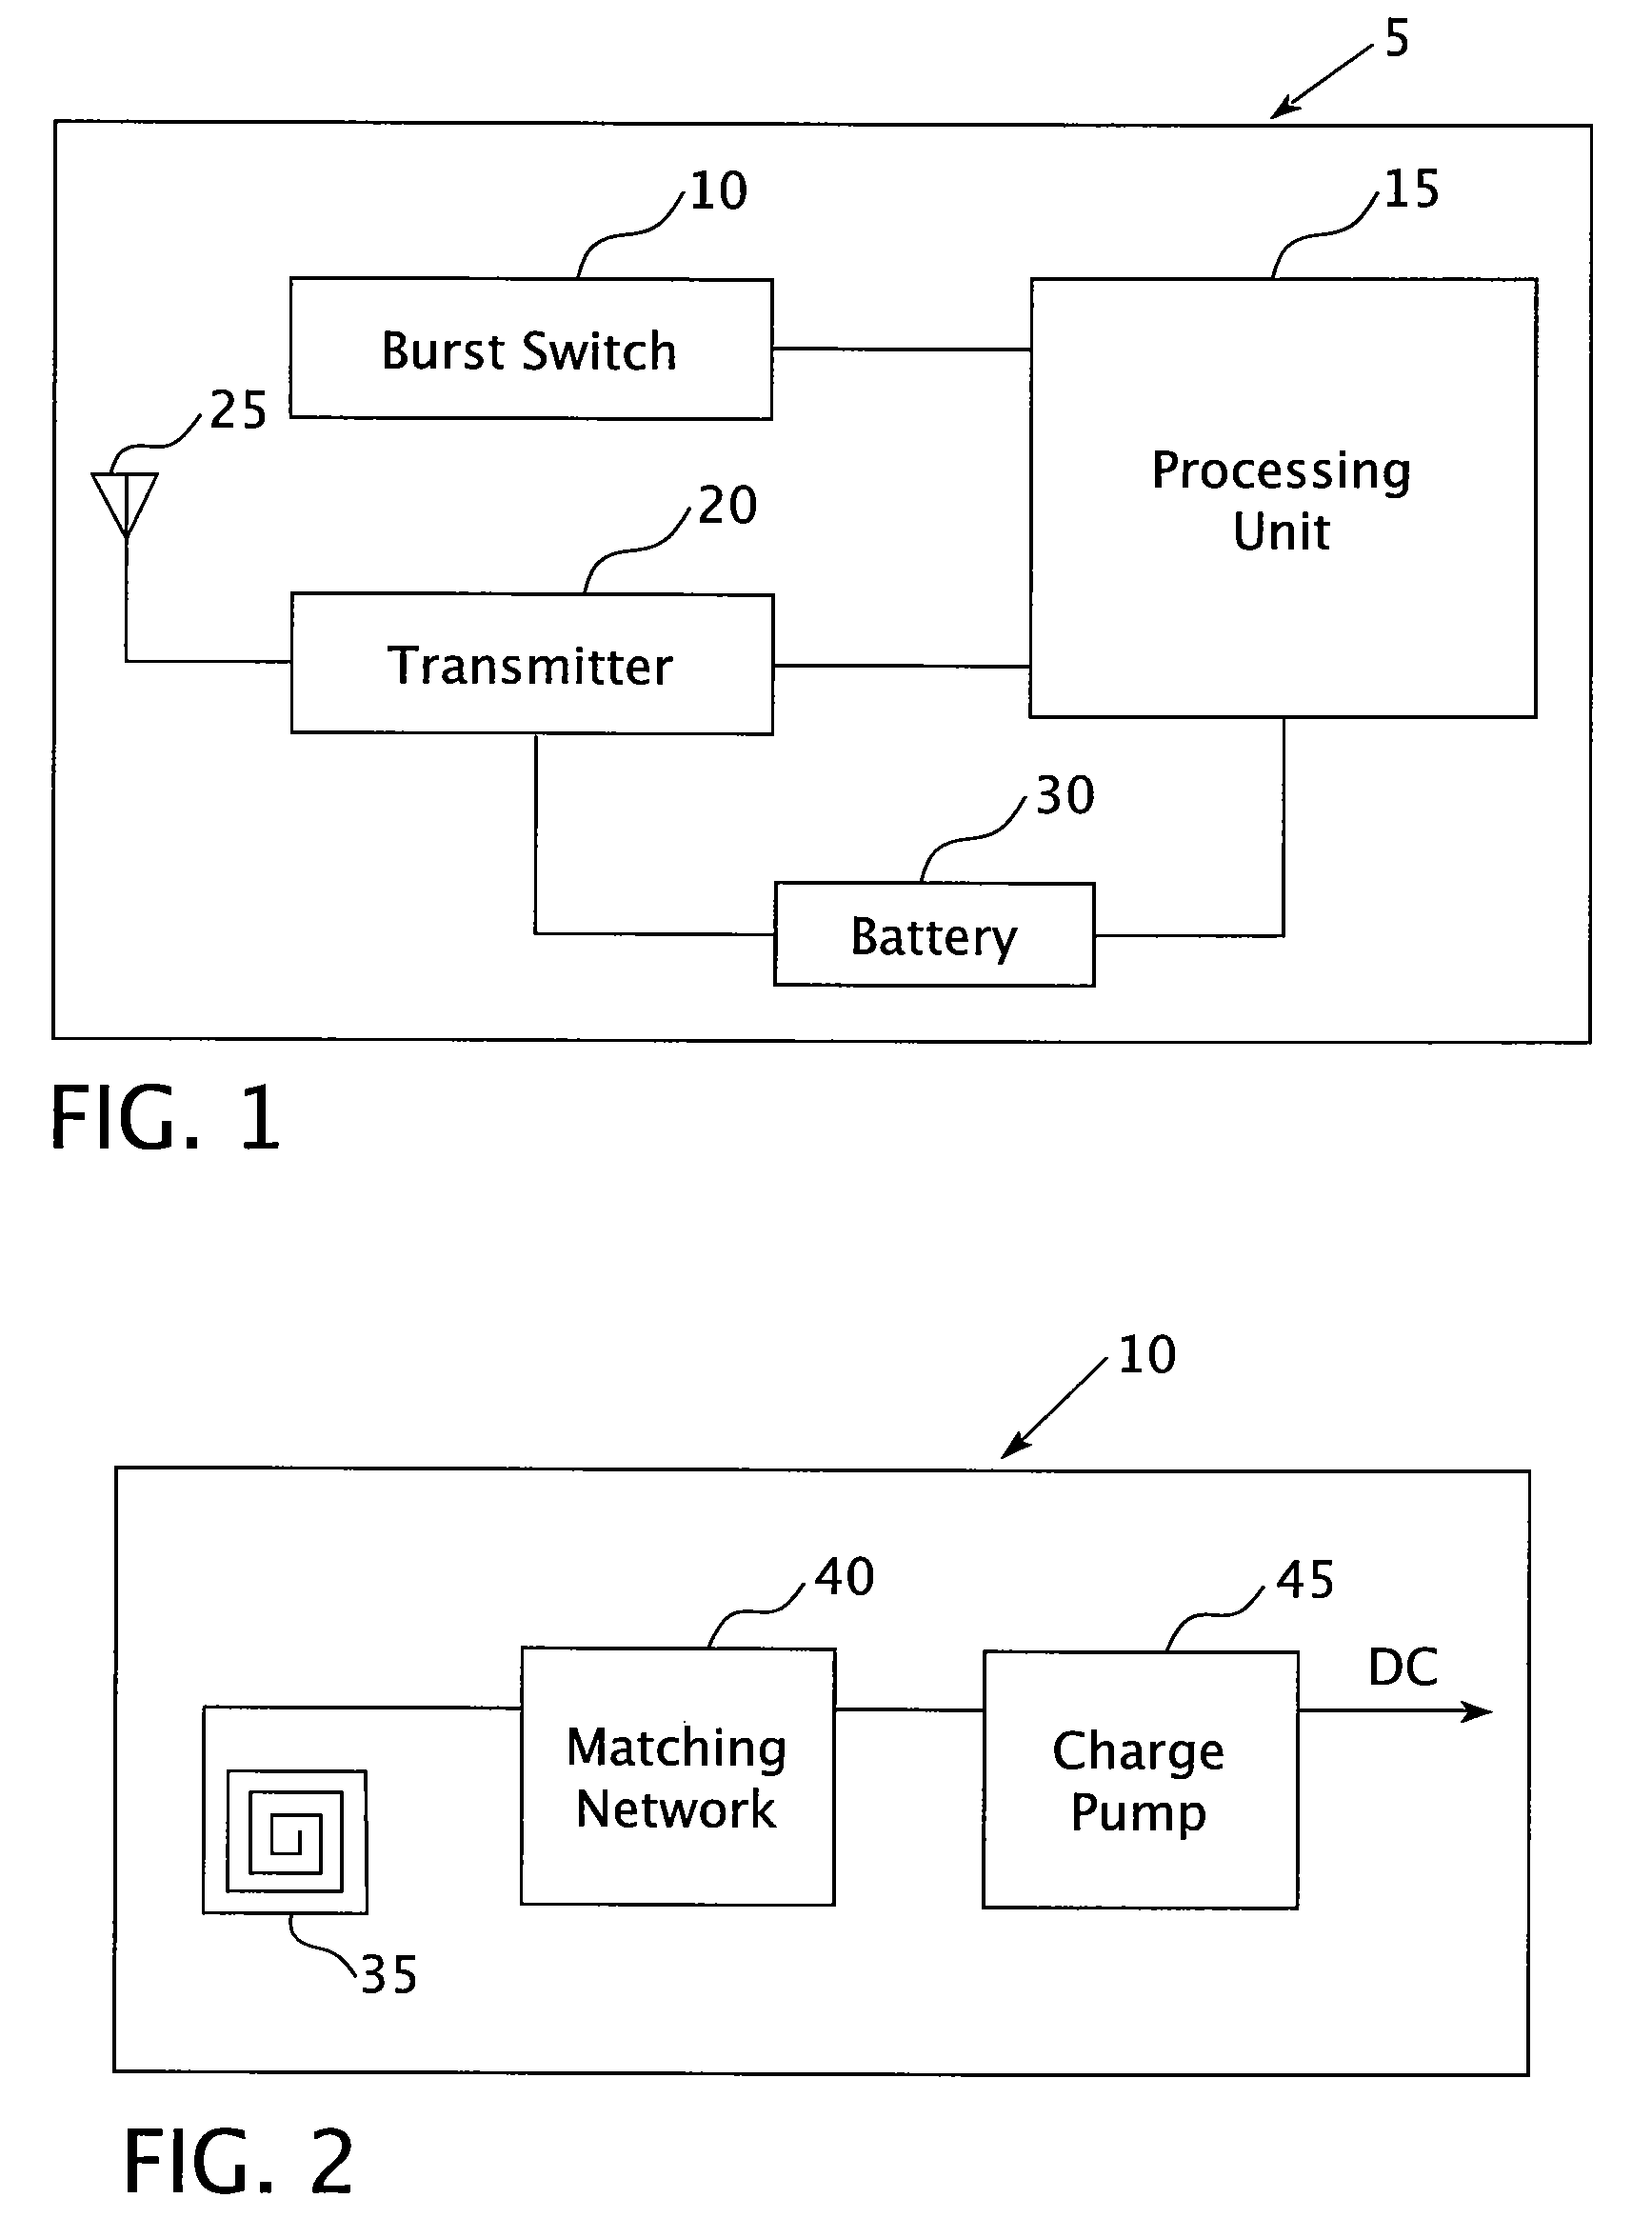 Methods and apparatus for switching a transponder to an active state, and asset management systems employing same